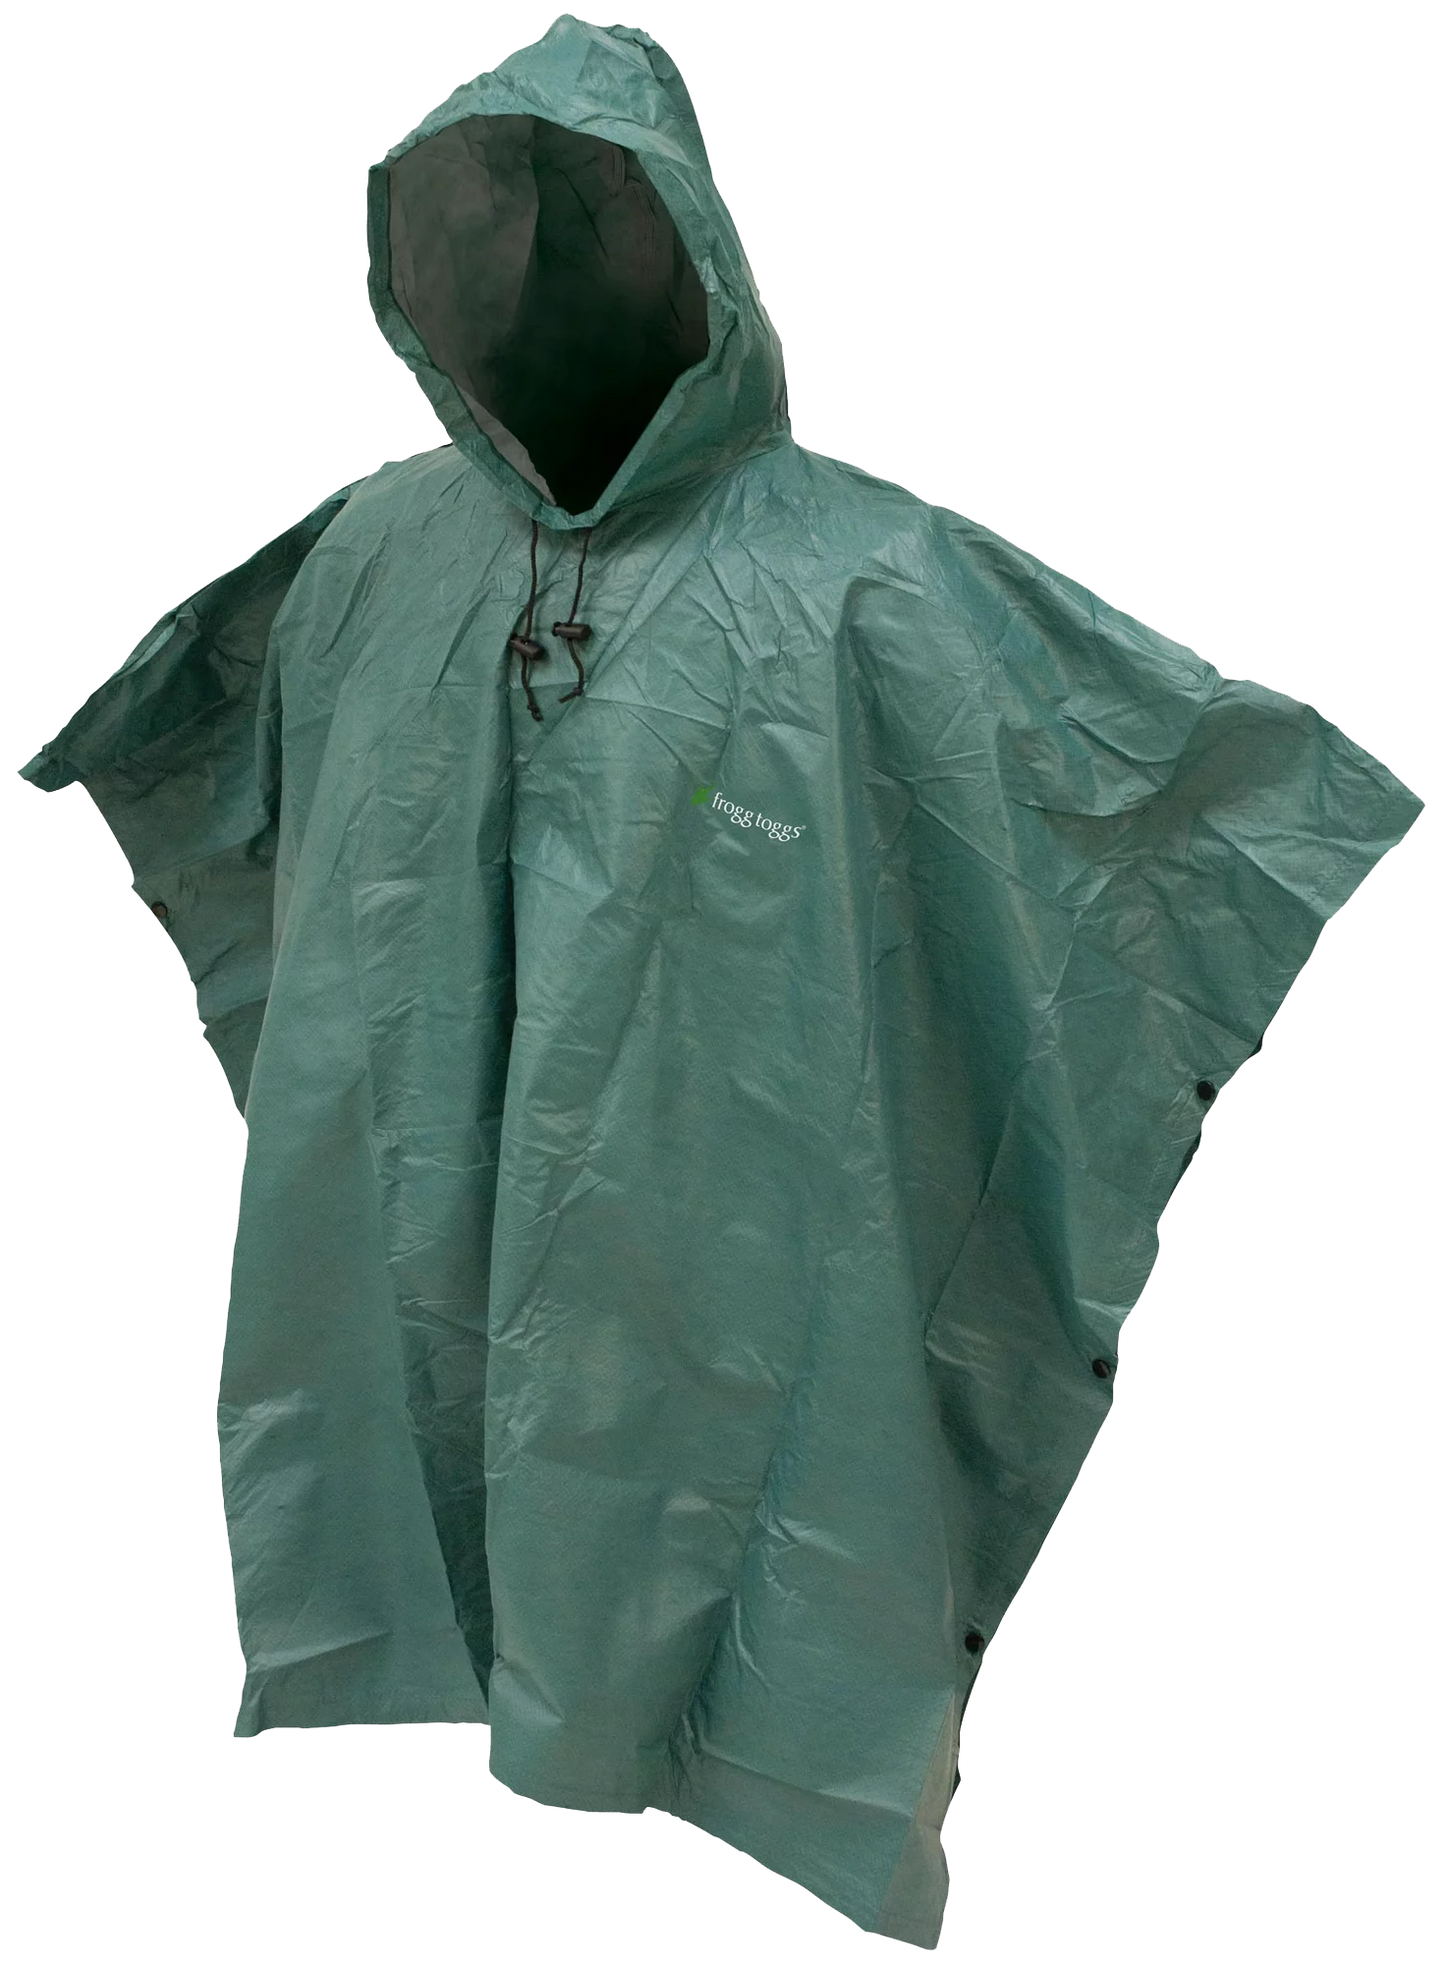 Adult Emergency Poncho by Frogg Toggs